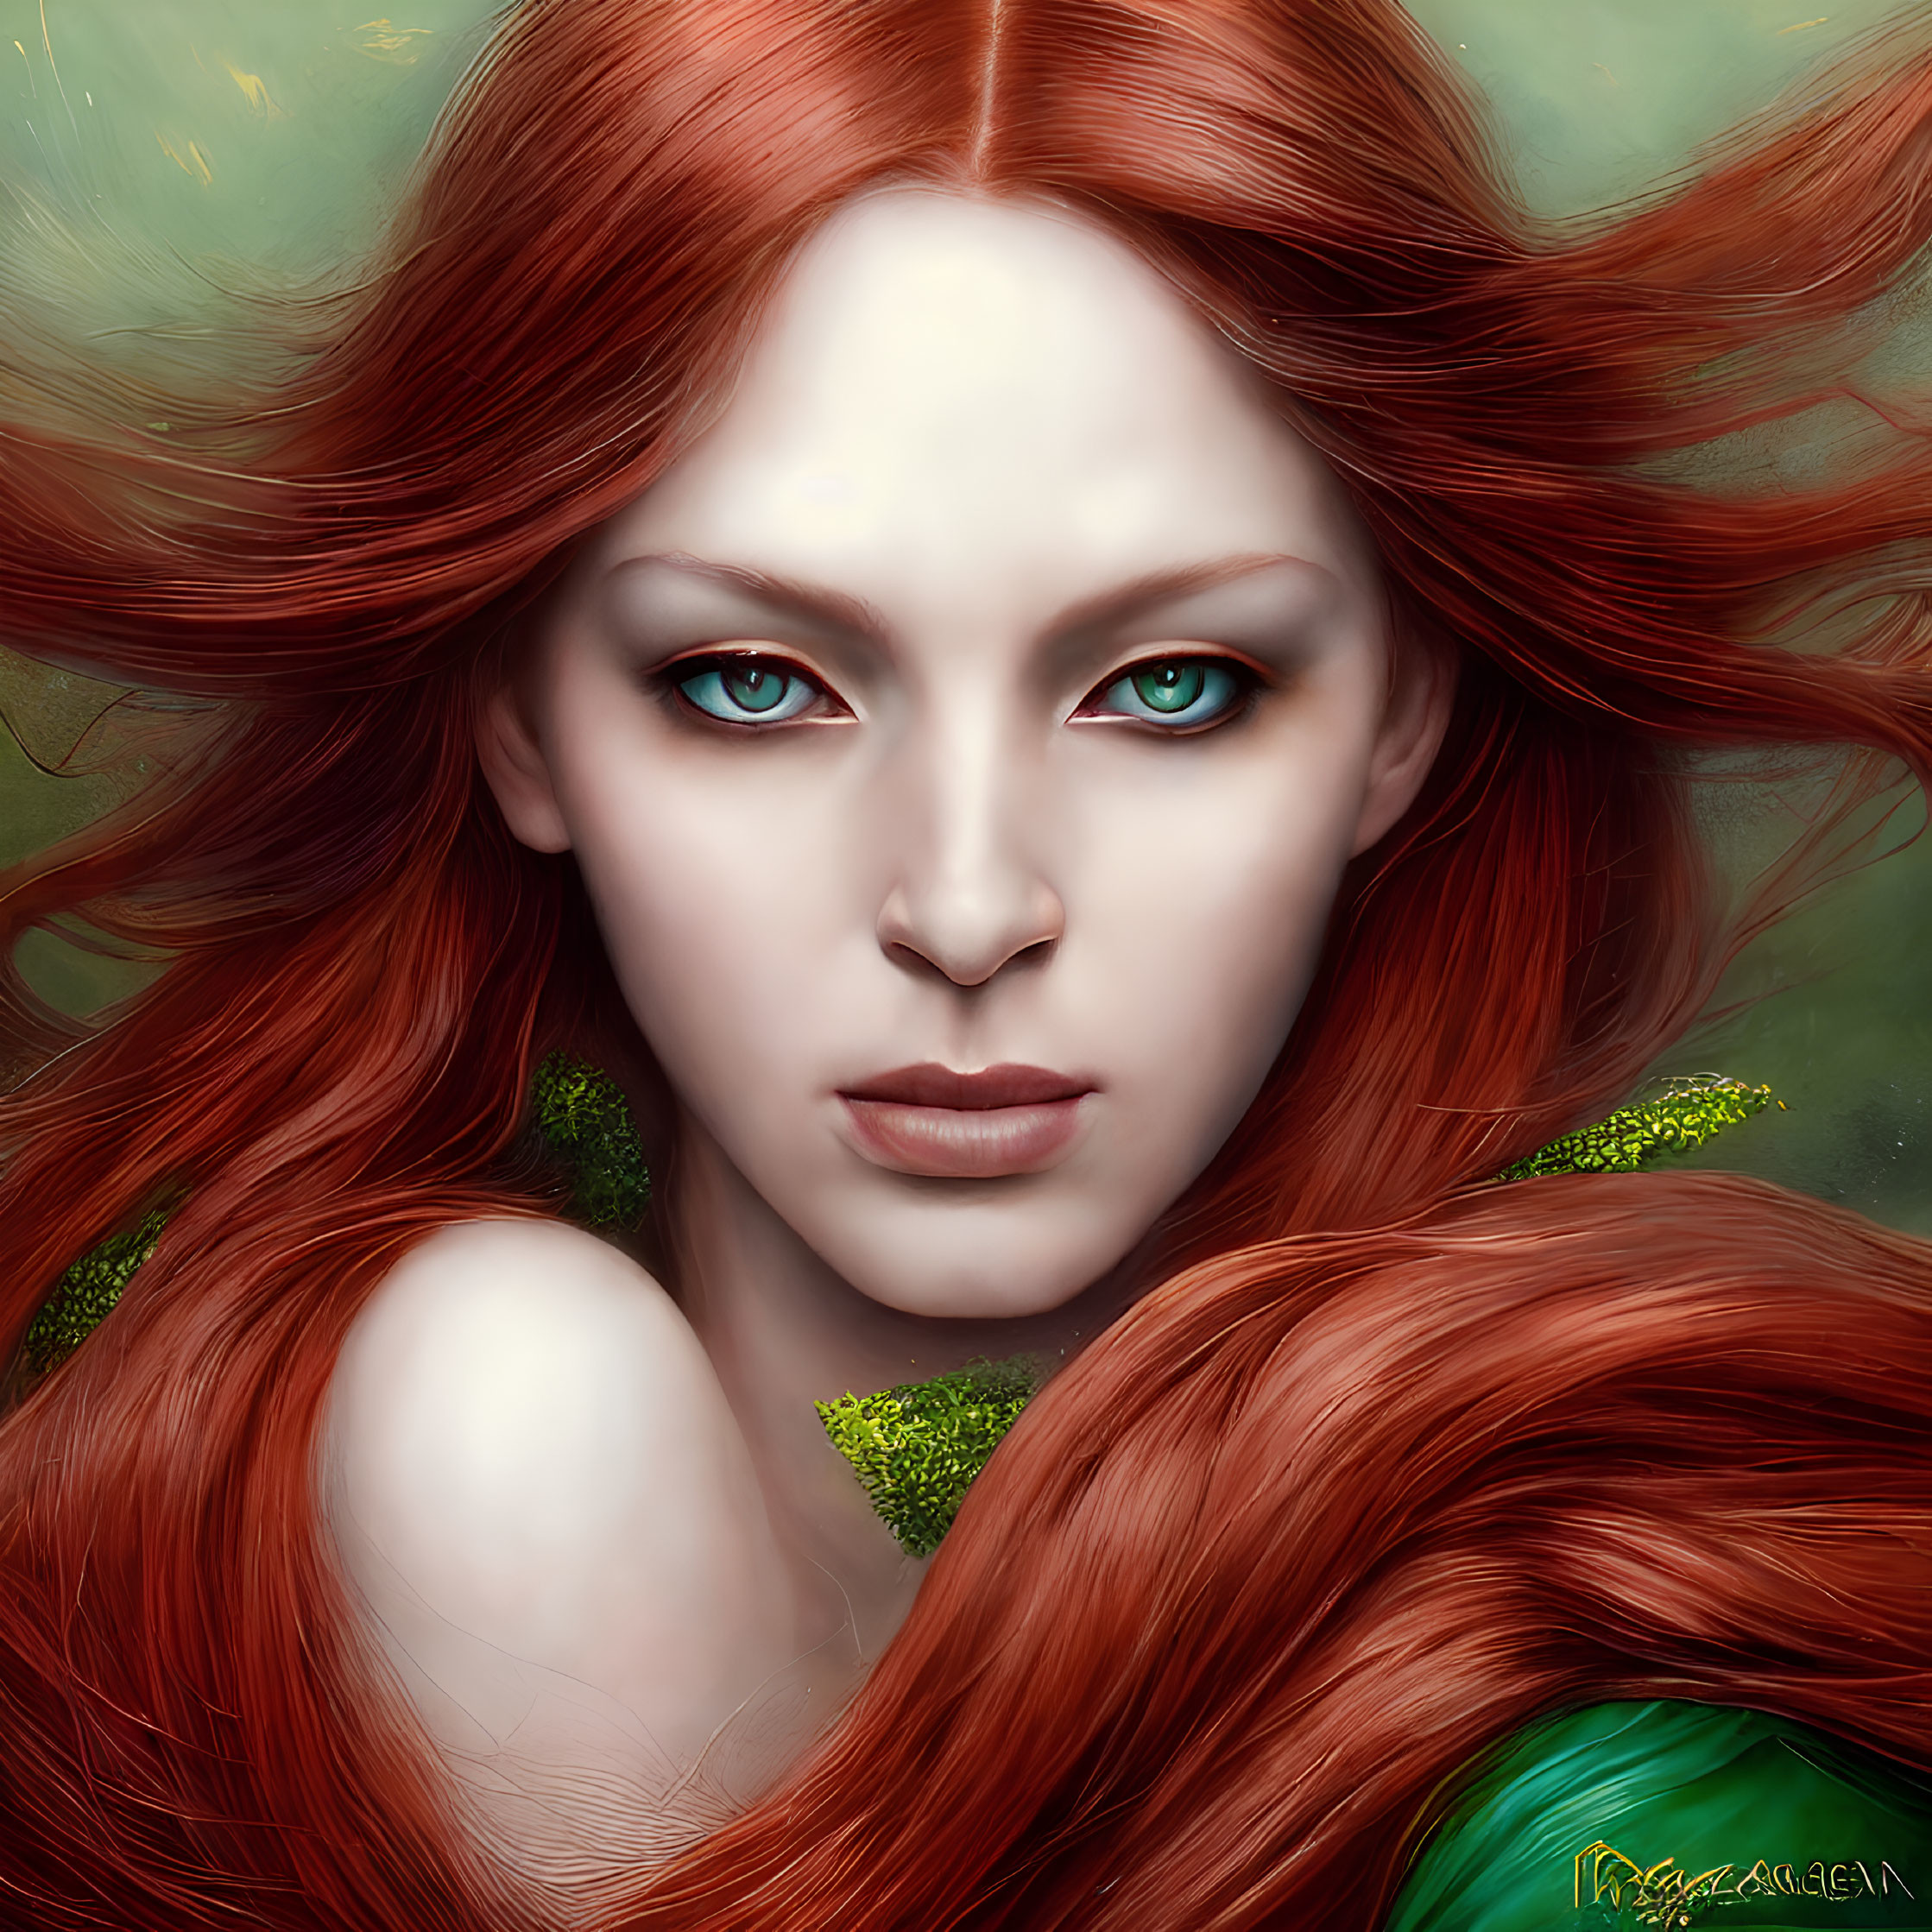 Digital portrait of a woman with red hair, green eyes, and foliage accents